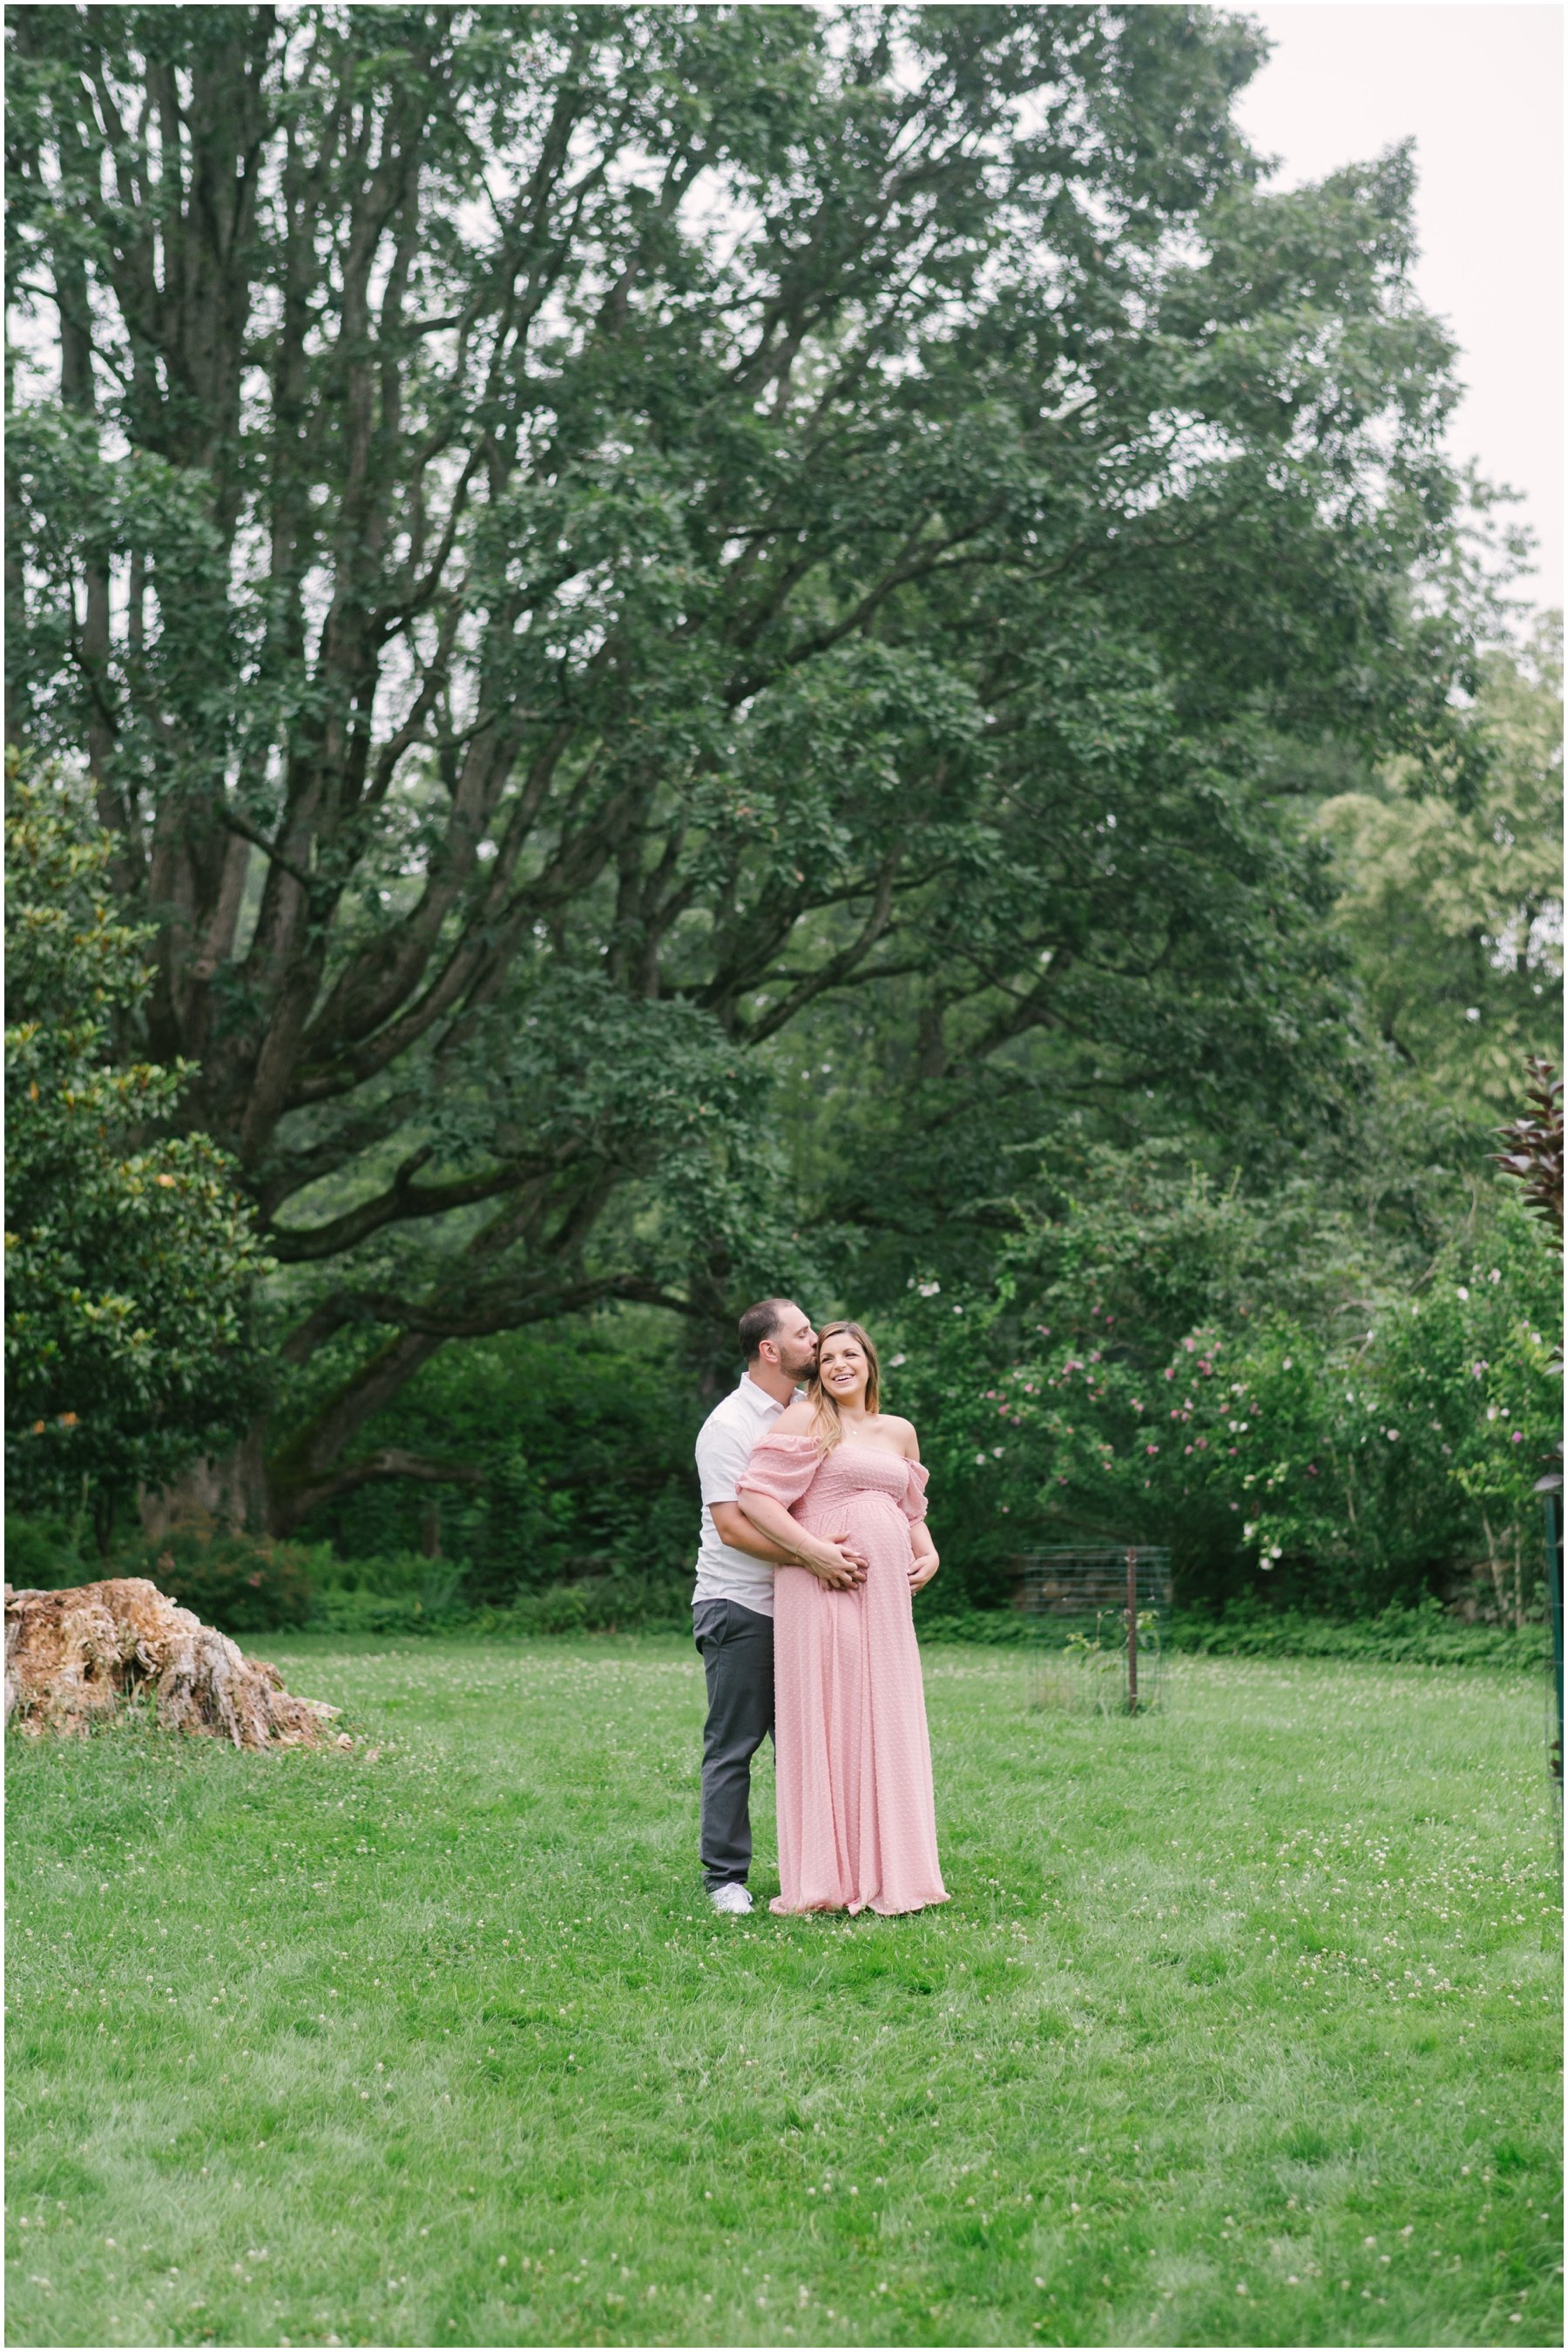 Man cradling pregnant belly during maternity session | NKB Photo